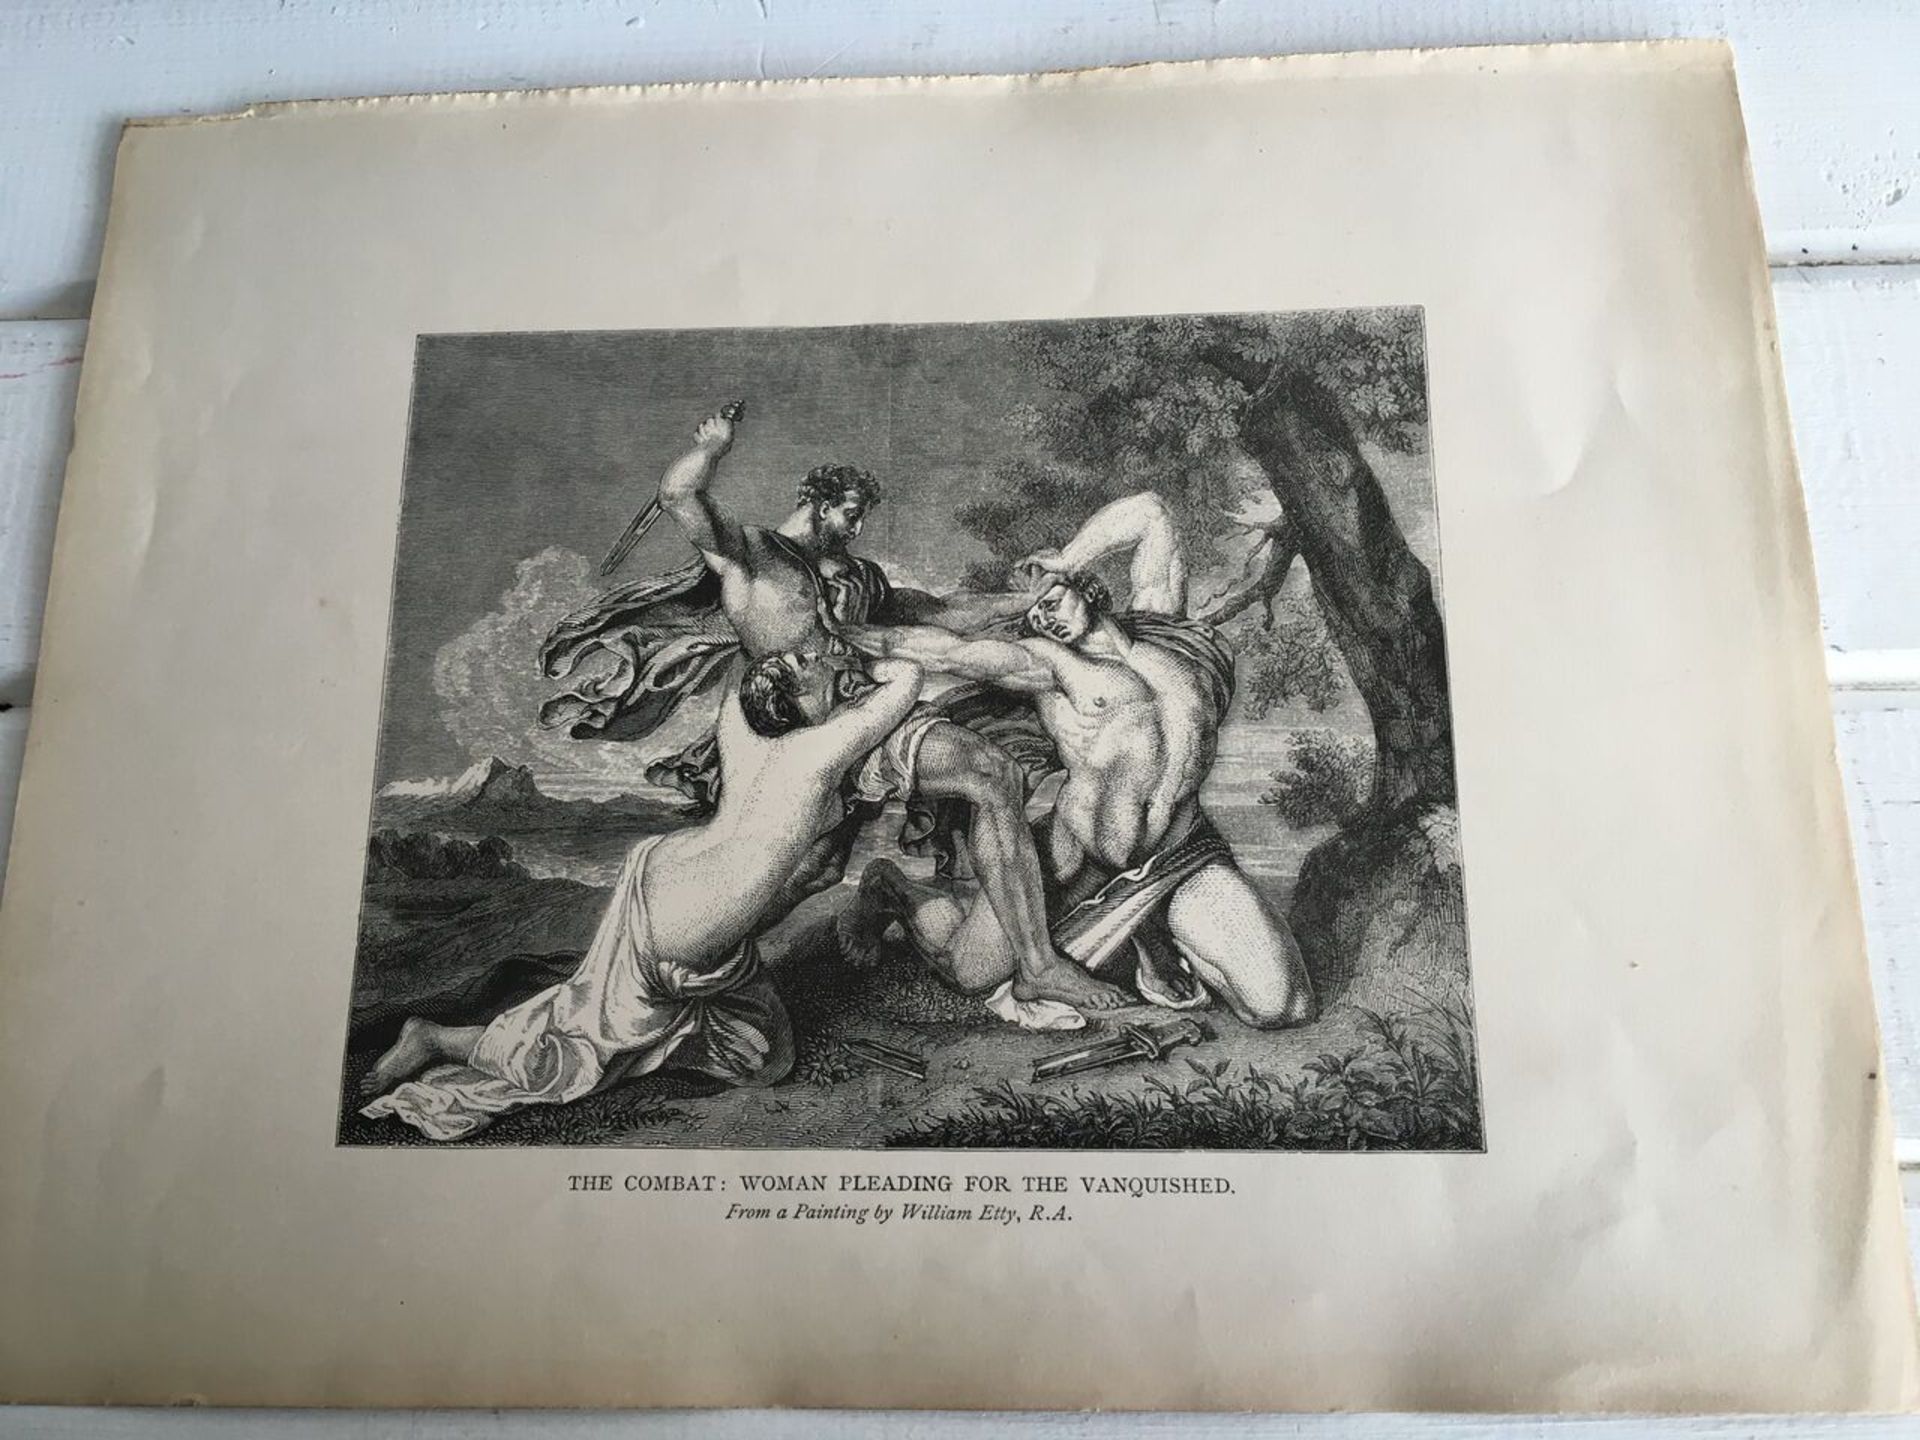 AN ENGRAVING c1900 OF A PAINTING BY WILLIAM ETTY (1787 - 1849 ). "THE COMBAT: WOMAN PLEADING FOR THE